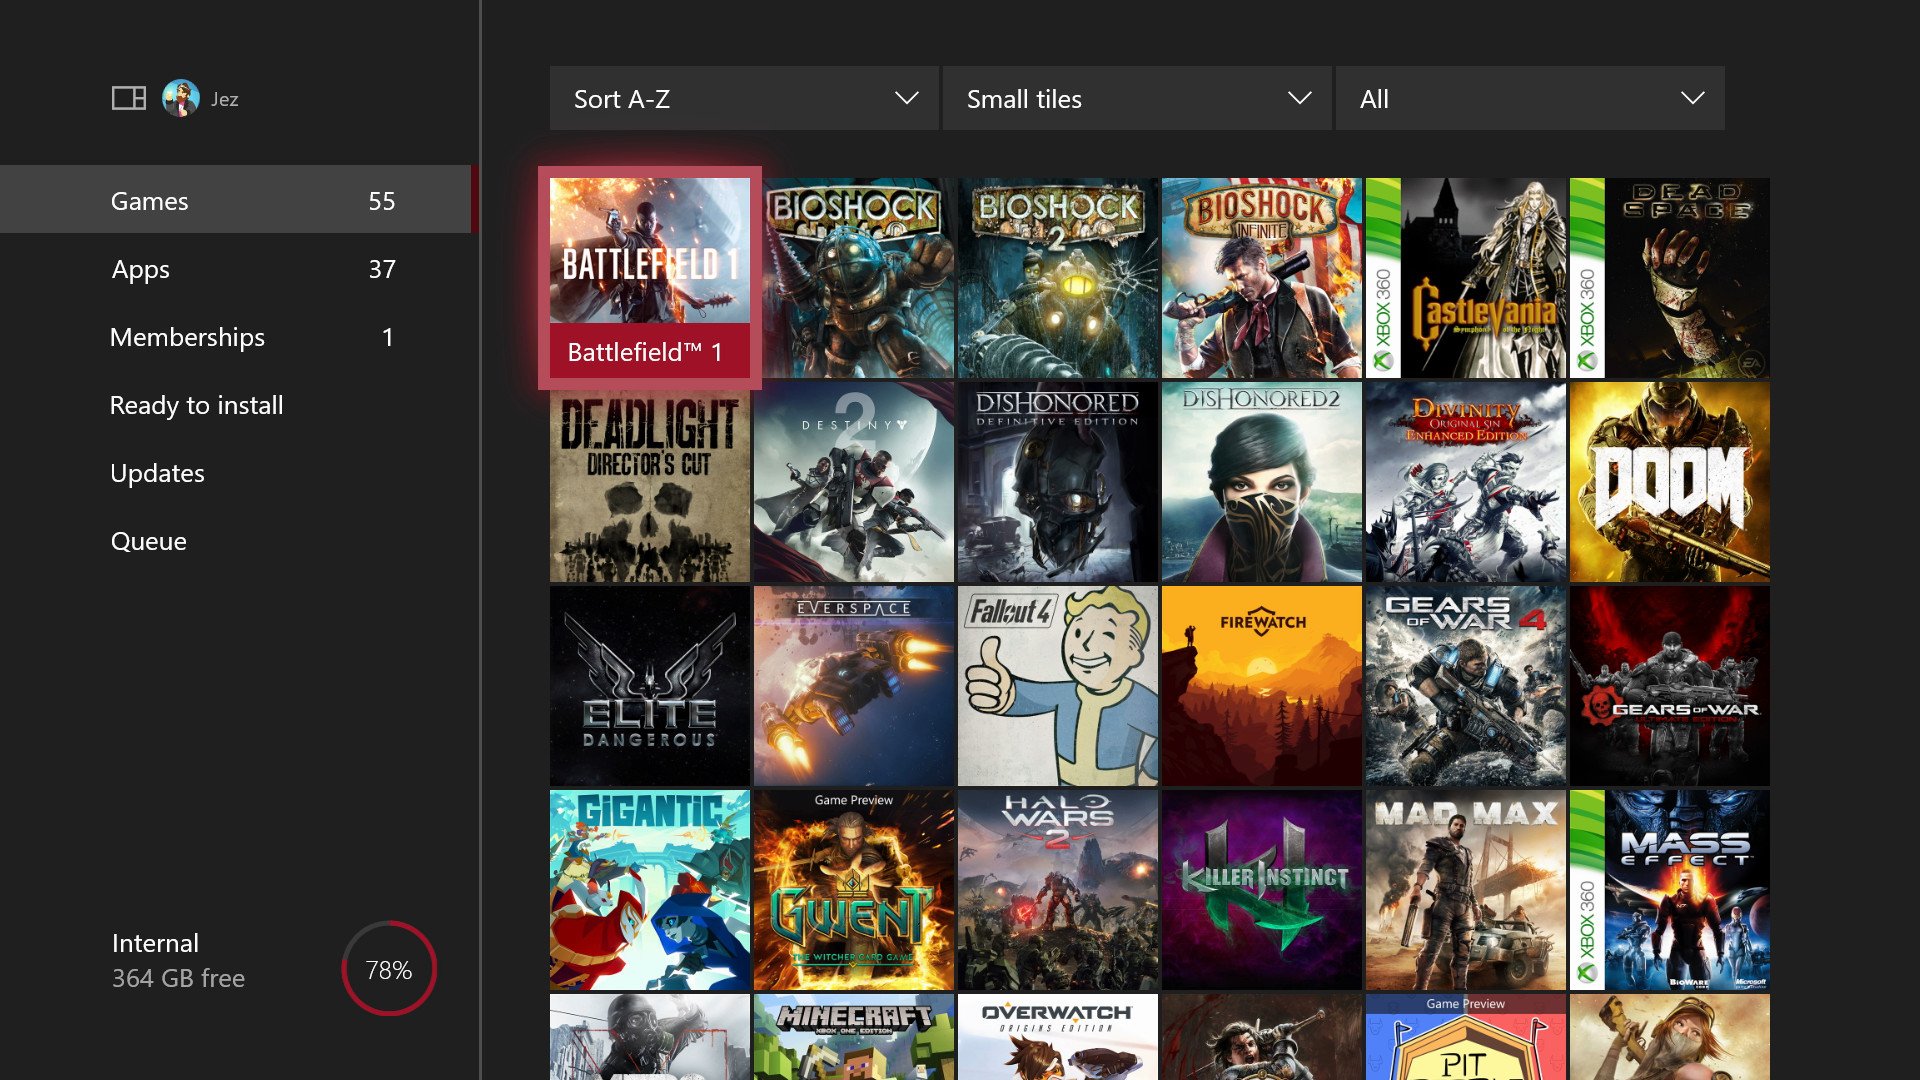 Xbox загрузка игры. How to download games on Xbox.